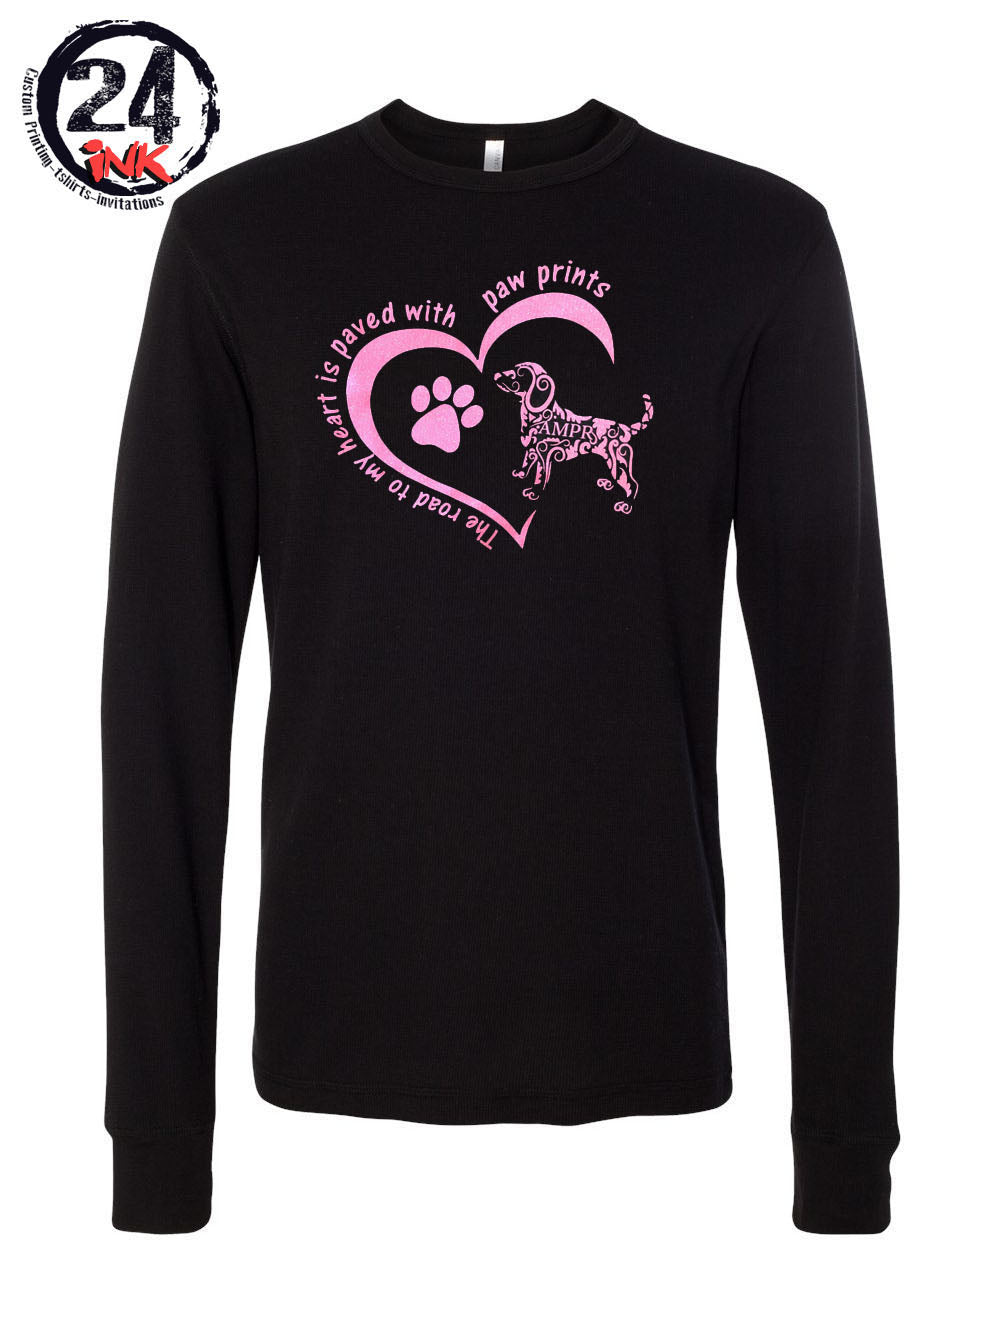 The road to my heart long sleeve shirt